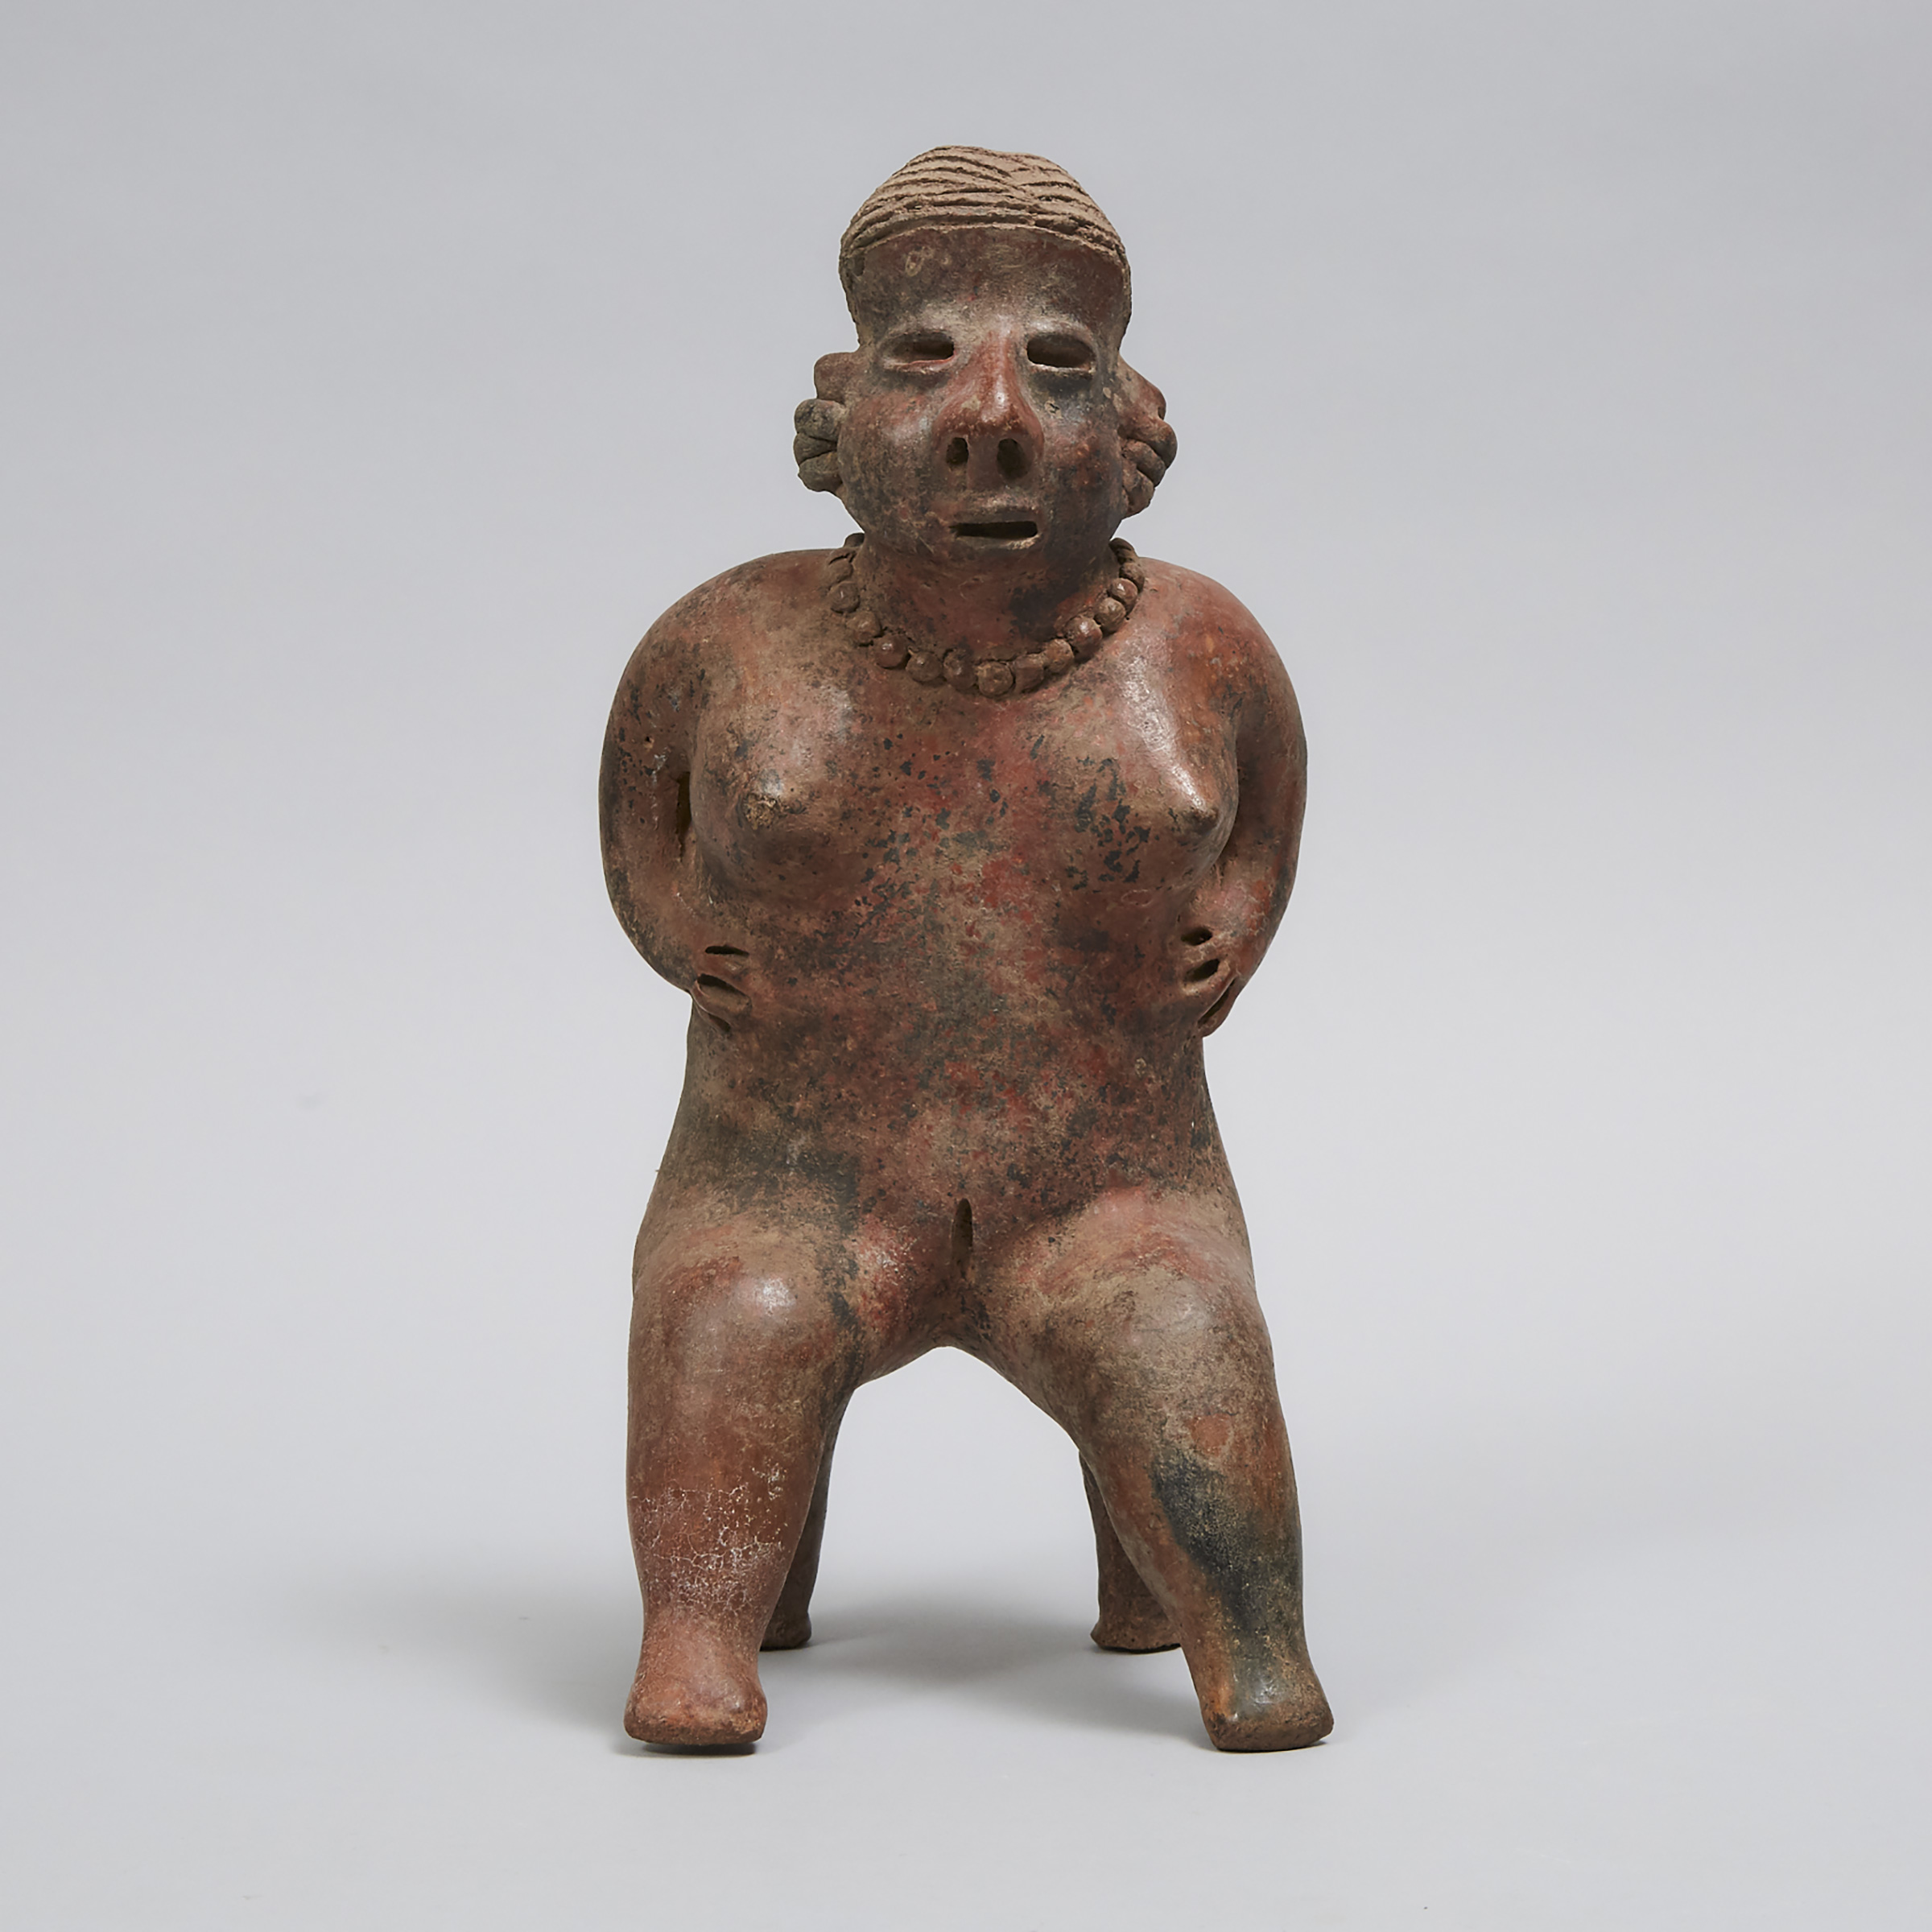 Nayarit Ixtlán del Río style Redware Pottery Figure, West Mexico, 100 B.C. - 200 A.D.